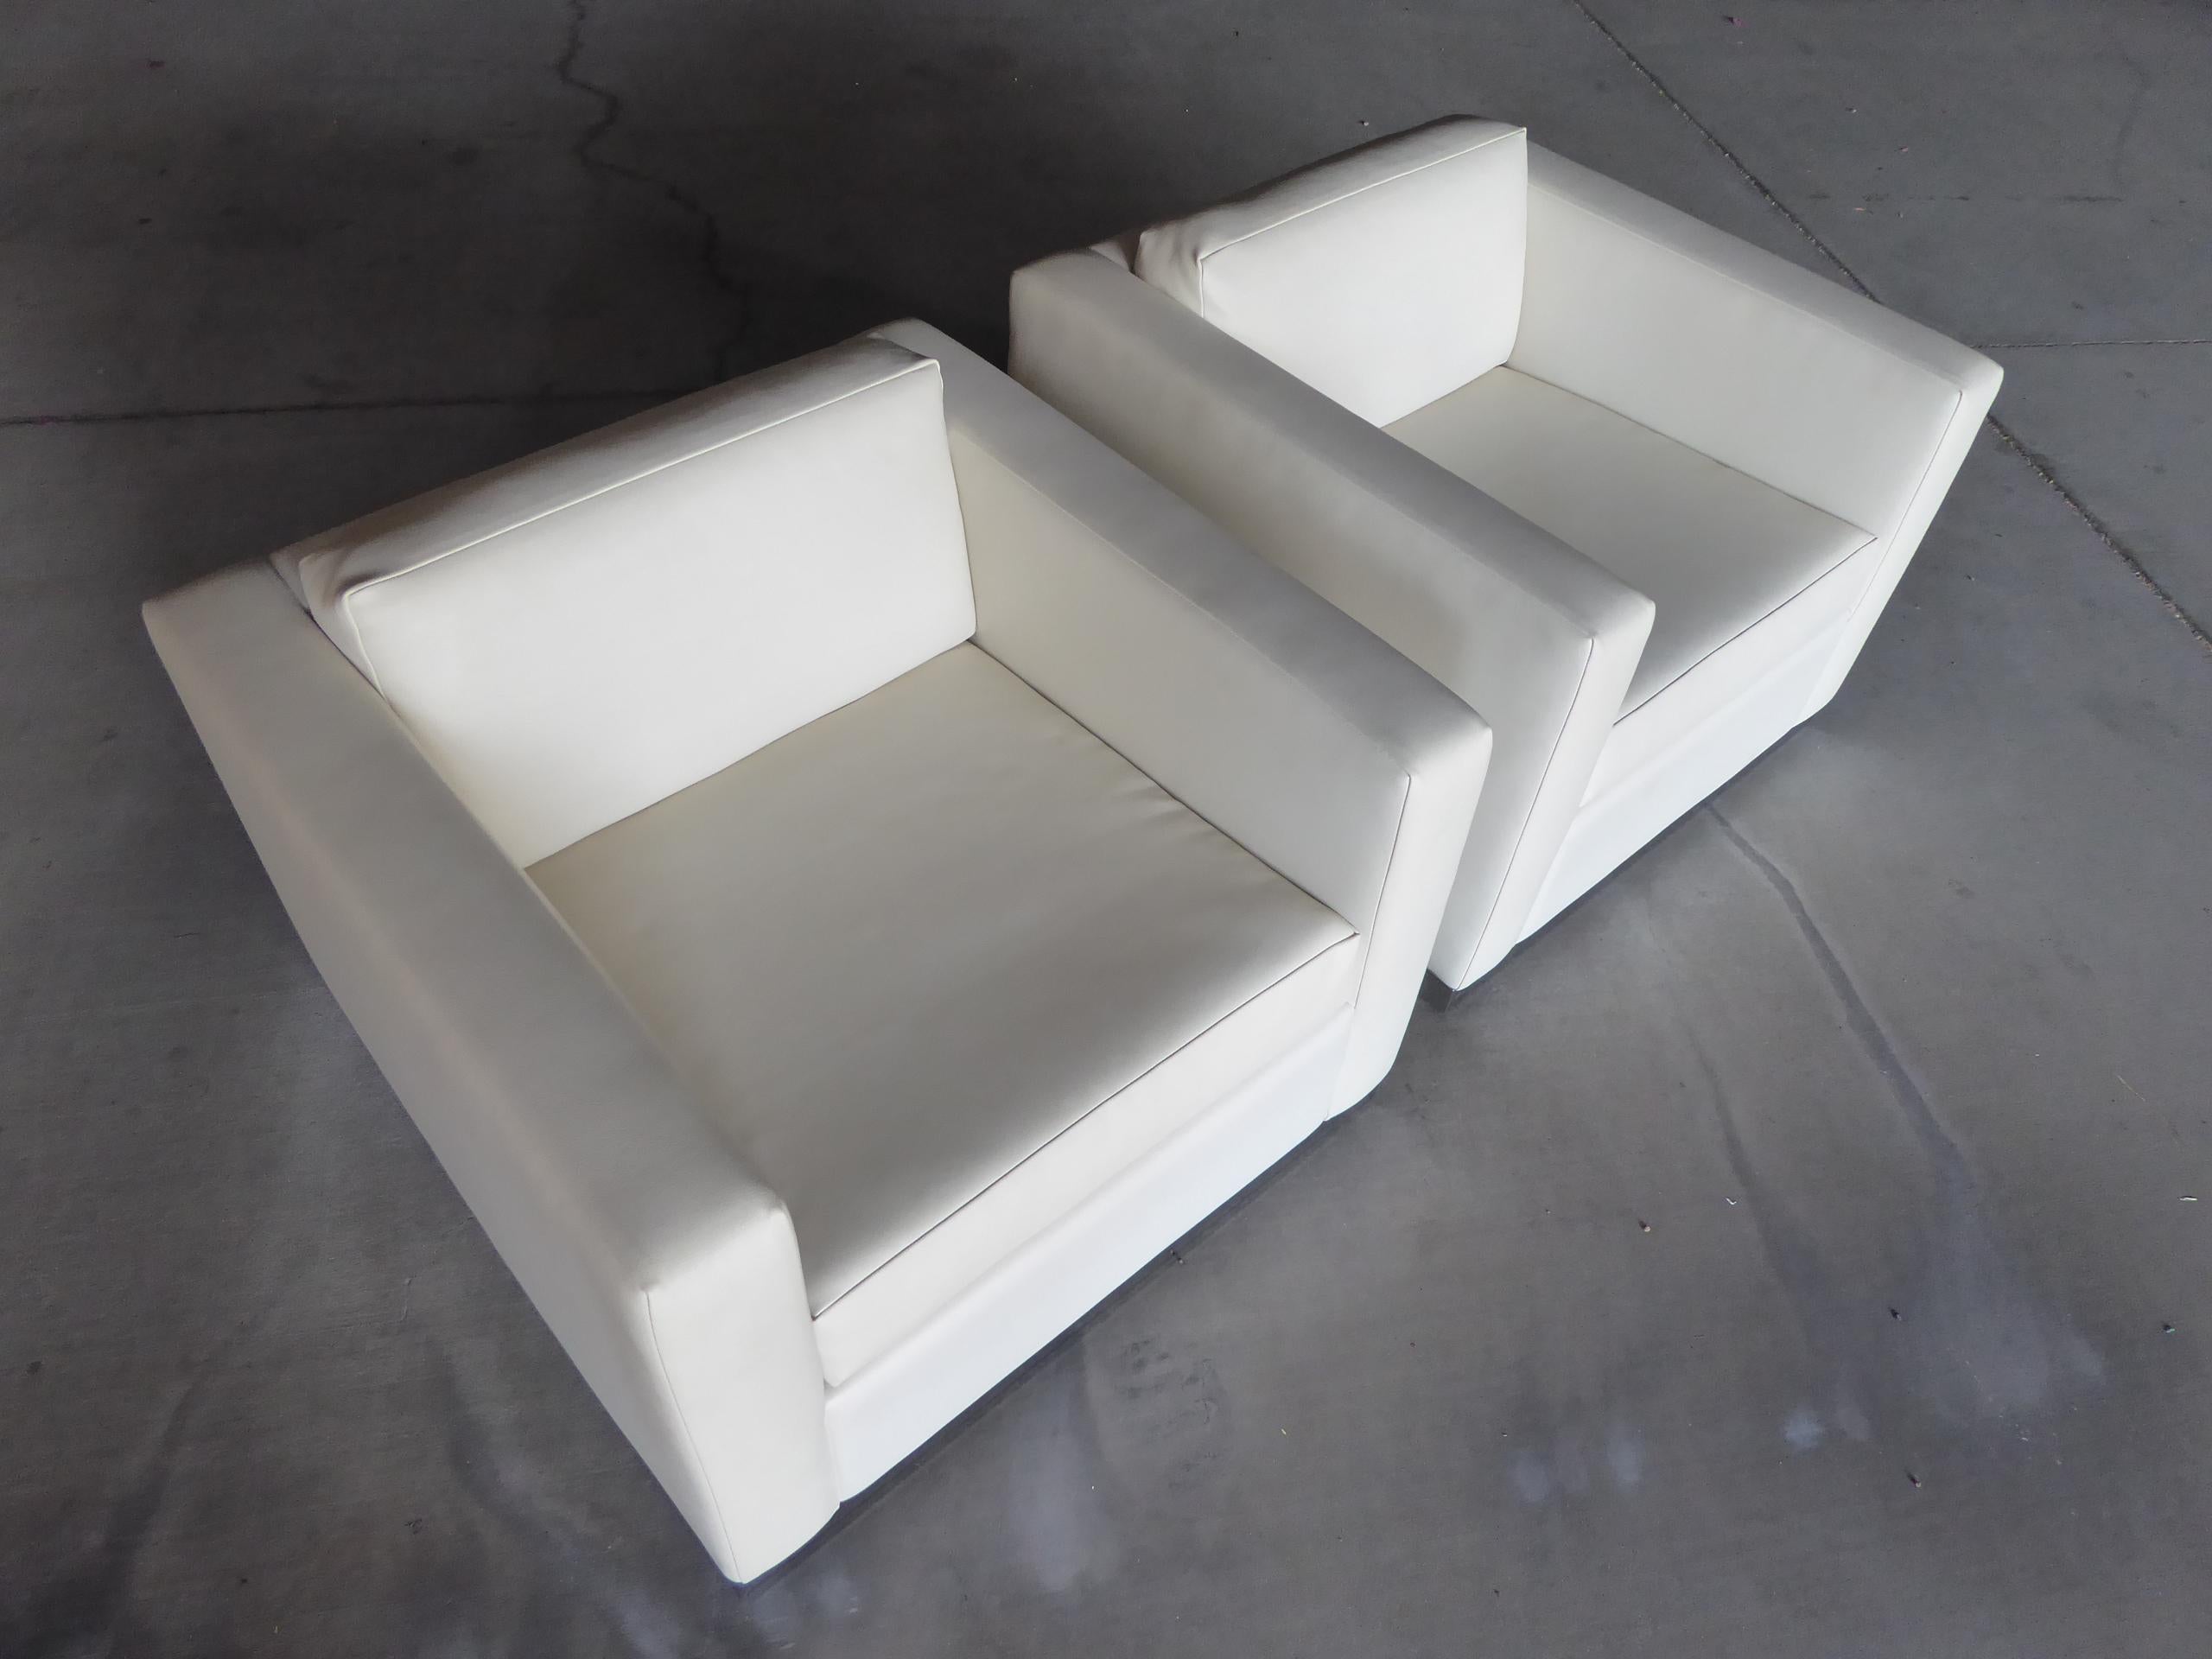 Pair of Vintage Canadian Cube Chairs In Excellent Condition For Sale In Palm Springs, CA